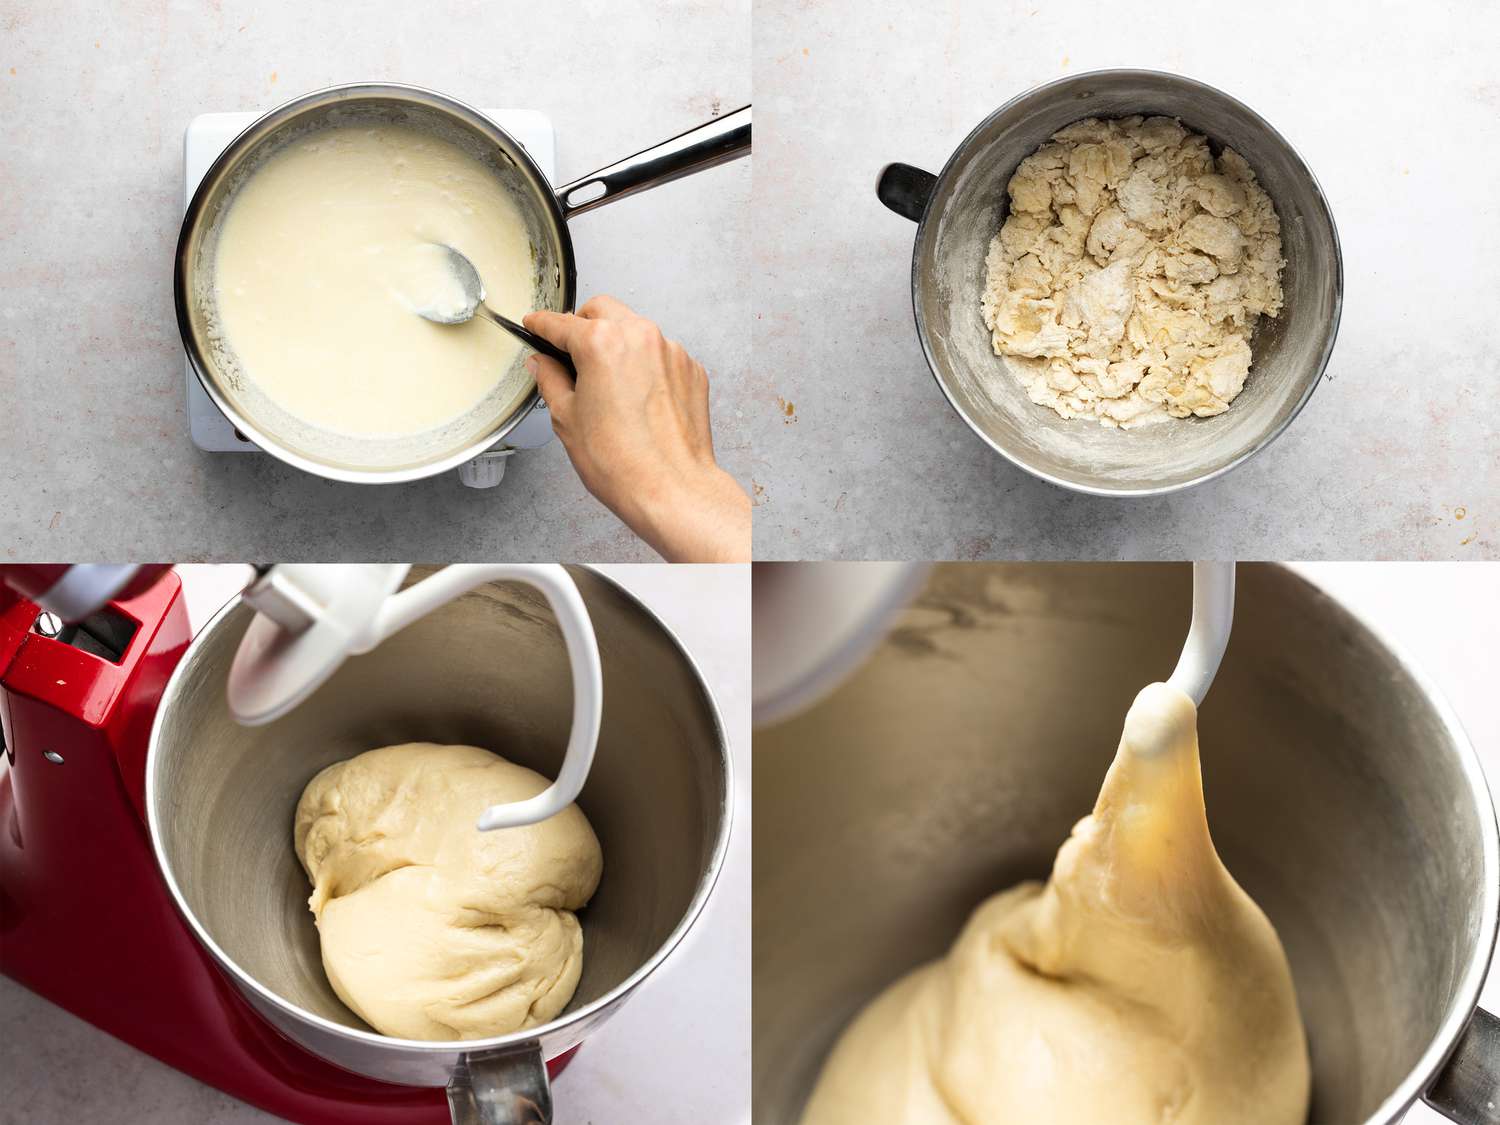 Flour, sugar, yeast, salt, and baking soda thoroughly combined inside stand mixer bowl